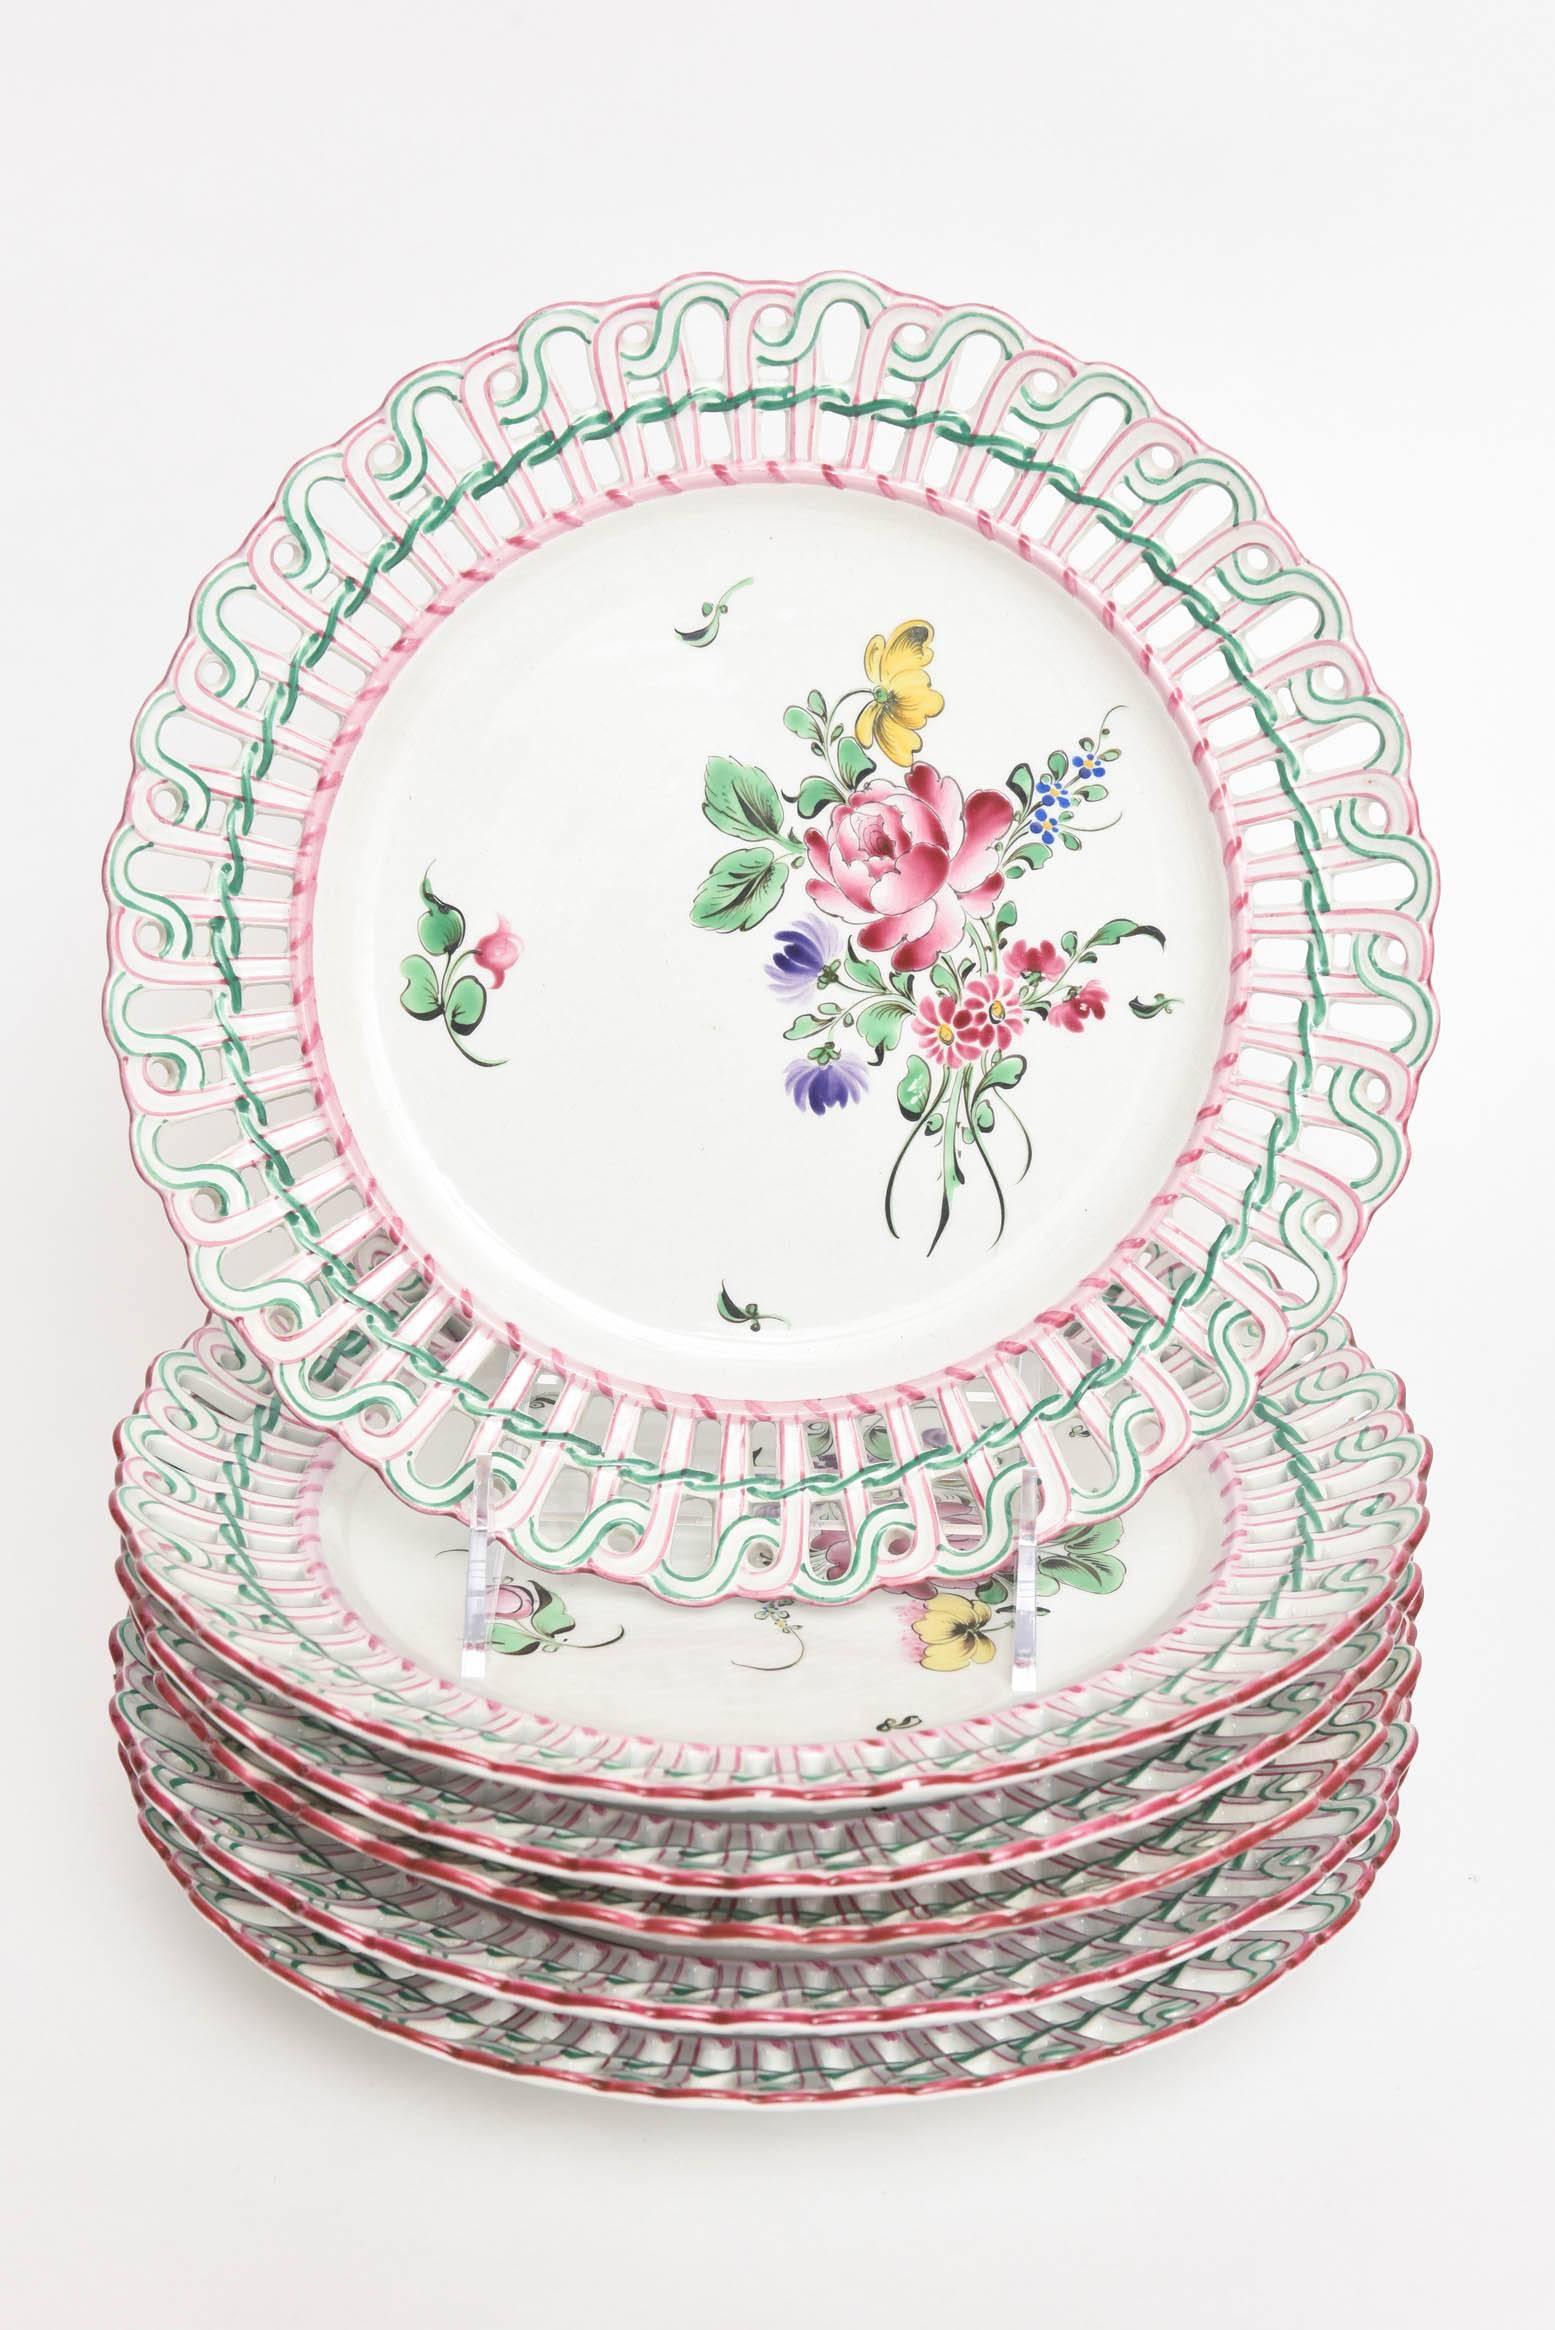 A delightful and charming set of 12 plates which feature different florals. While these plates are almost a hundred years old, this pattern has been made in many different combinations and still continues to be made. Timeless and so fresh and pretty.